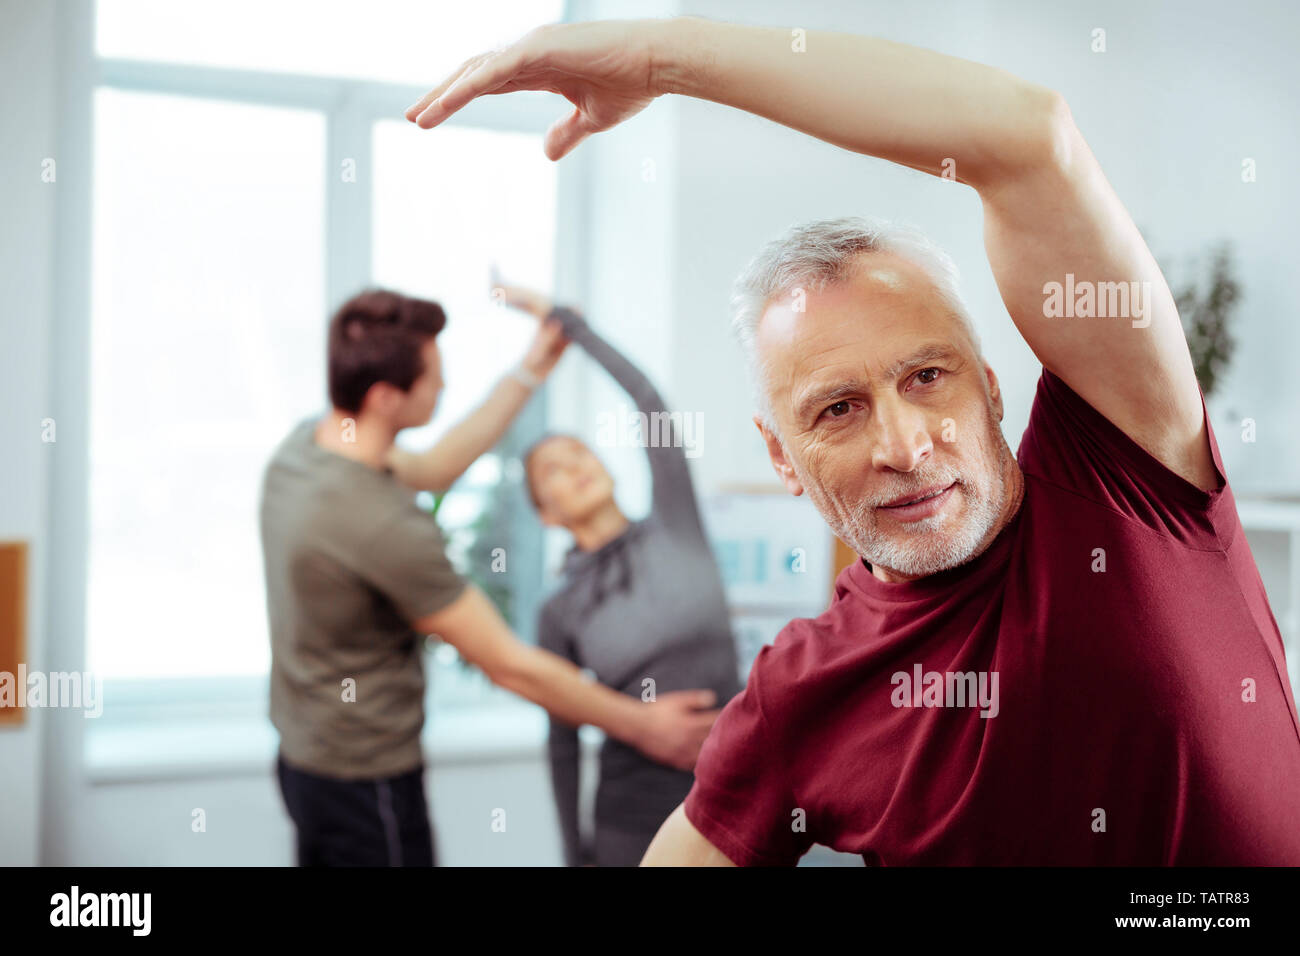 Healthy lifestyle. Handsome mature man exercising while trying to be fit Stock Photo